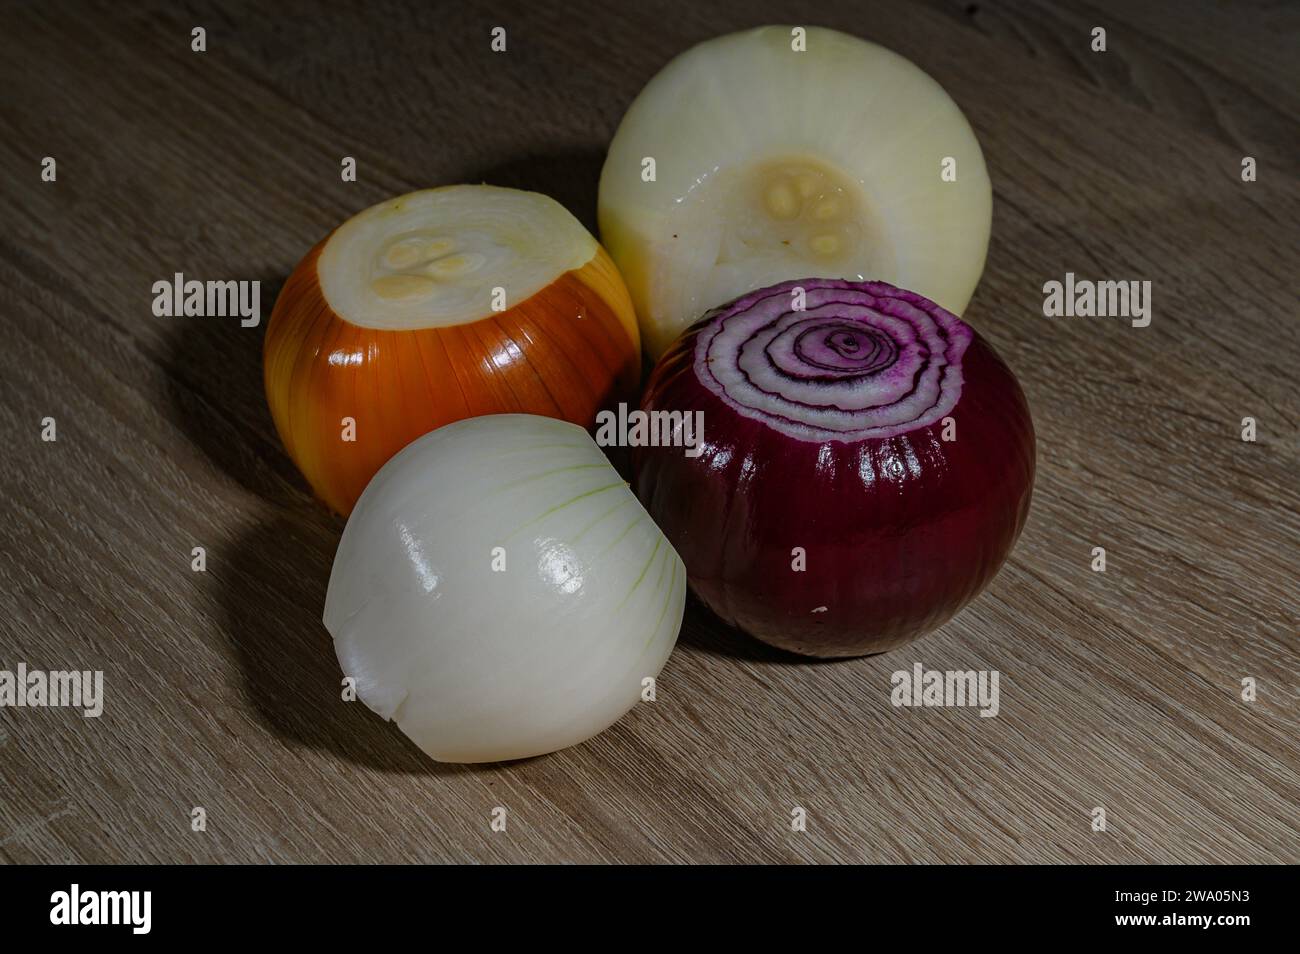 four onions, one of each type, a red or red onion, sweet white onion, normal onion and spring onion or French onion. on a wooden board Stock Photo